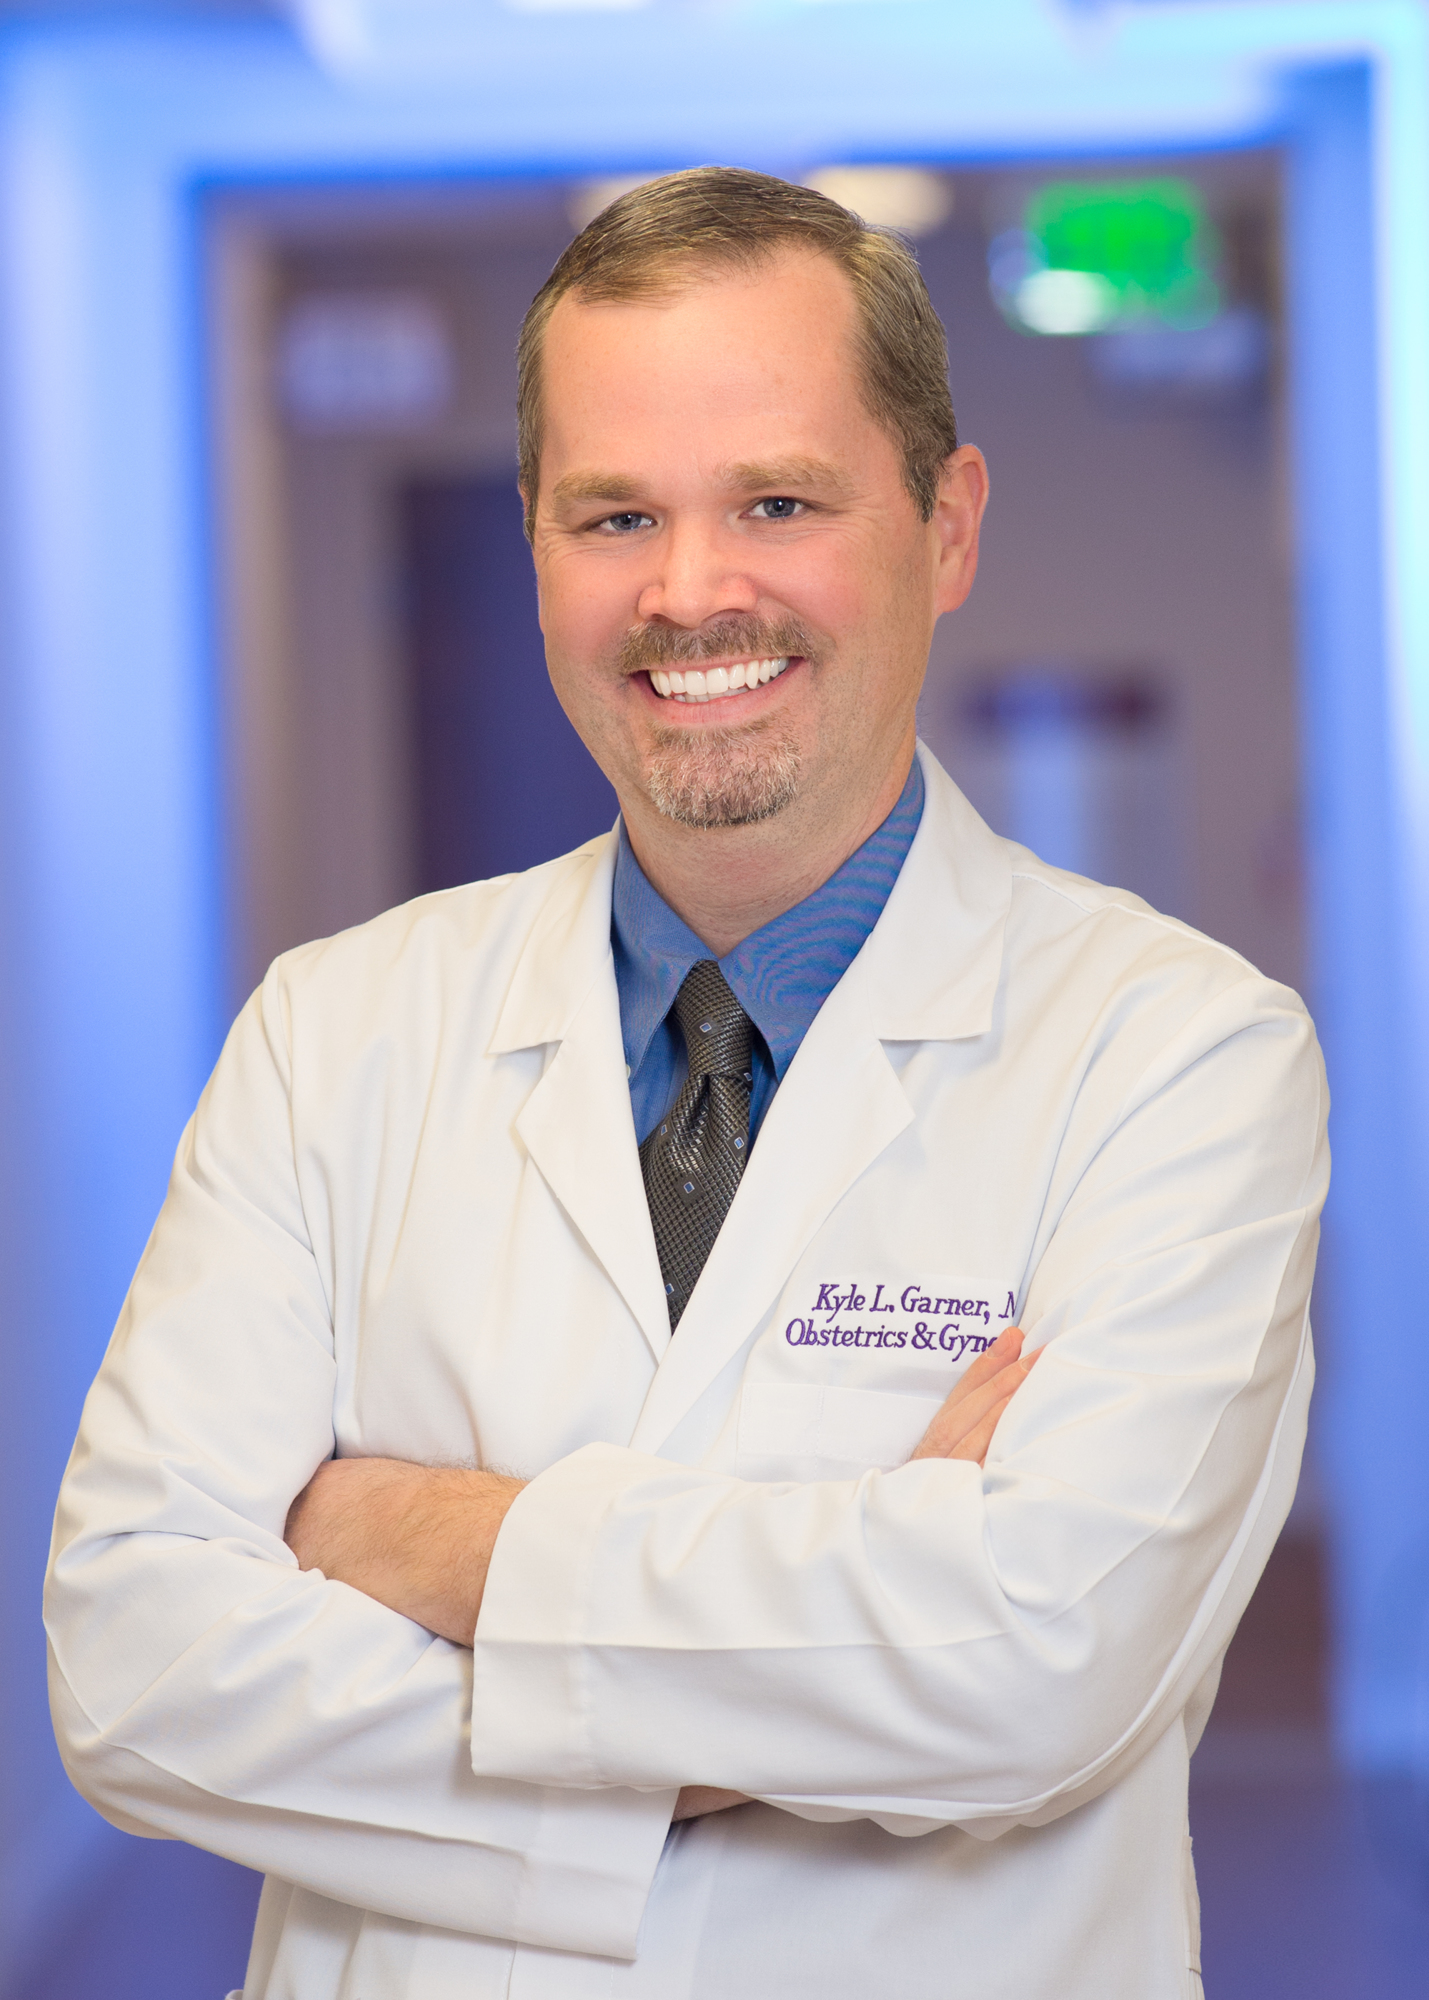 Courtesy. Dr. Kyle Garner will be the new associate chief medical officer on a part-time basis at the SMH Venice campus when it opens in November.